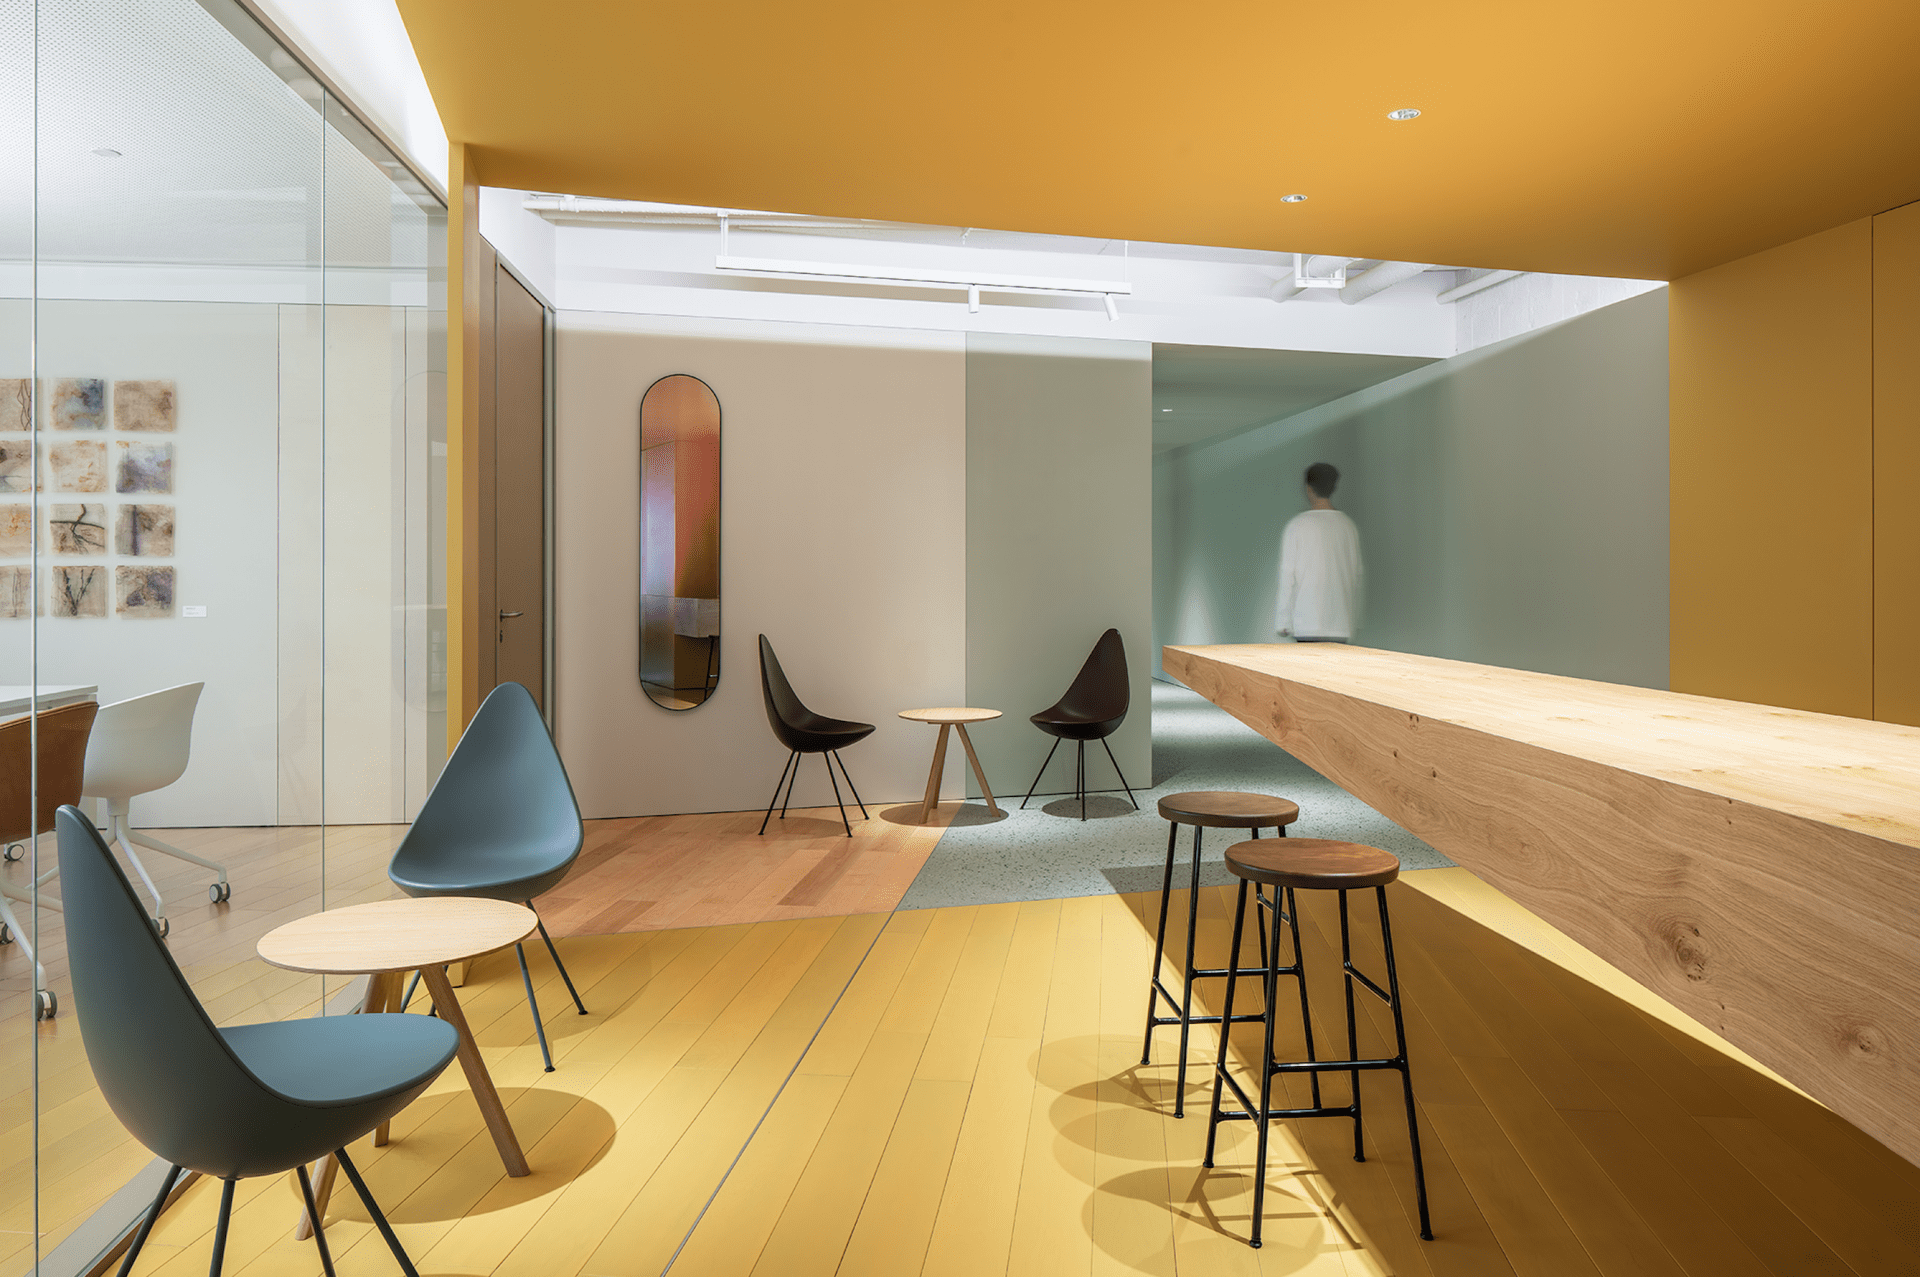 ECCO Xi'an Office, Workspaces, Ecco, OnOffice magazine